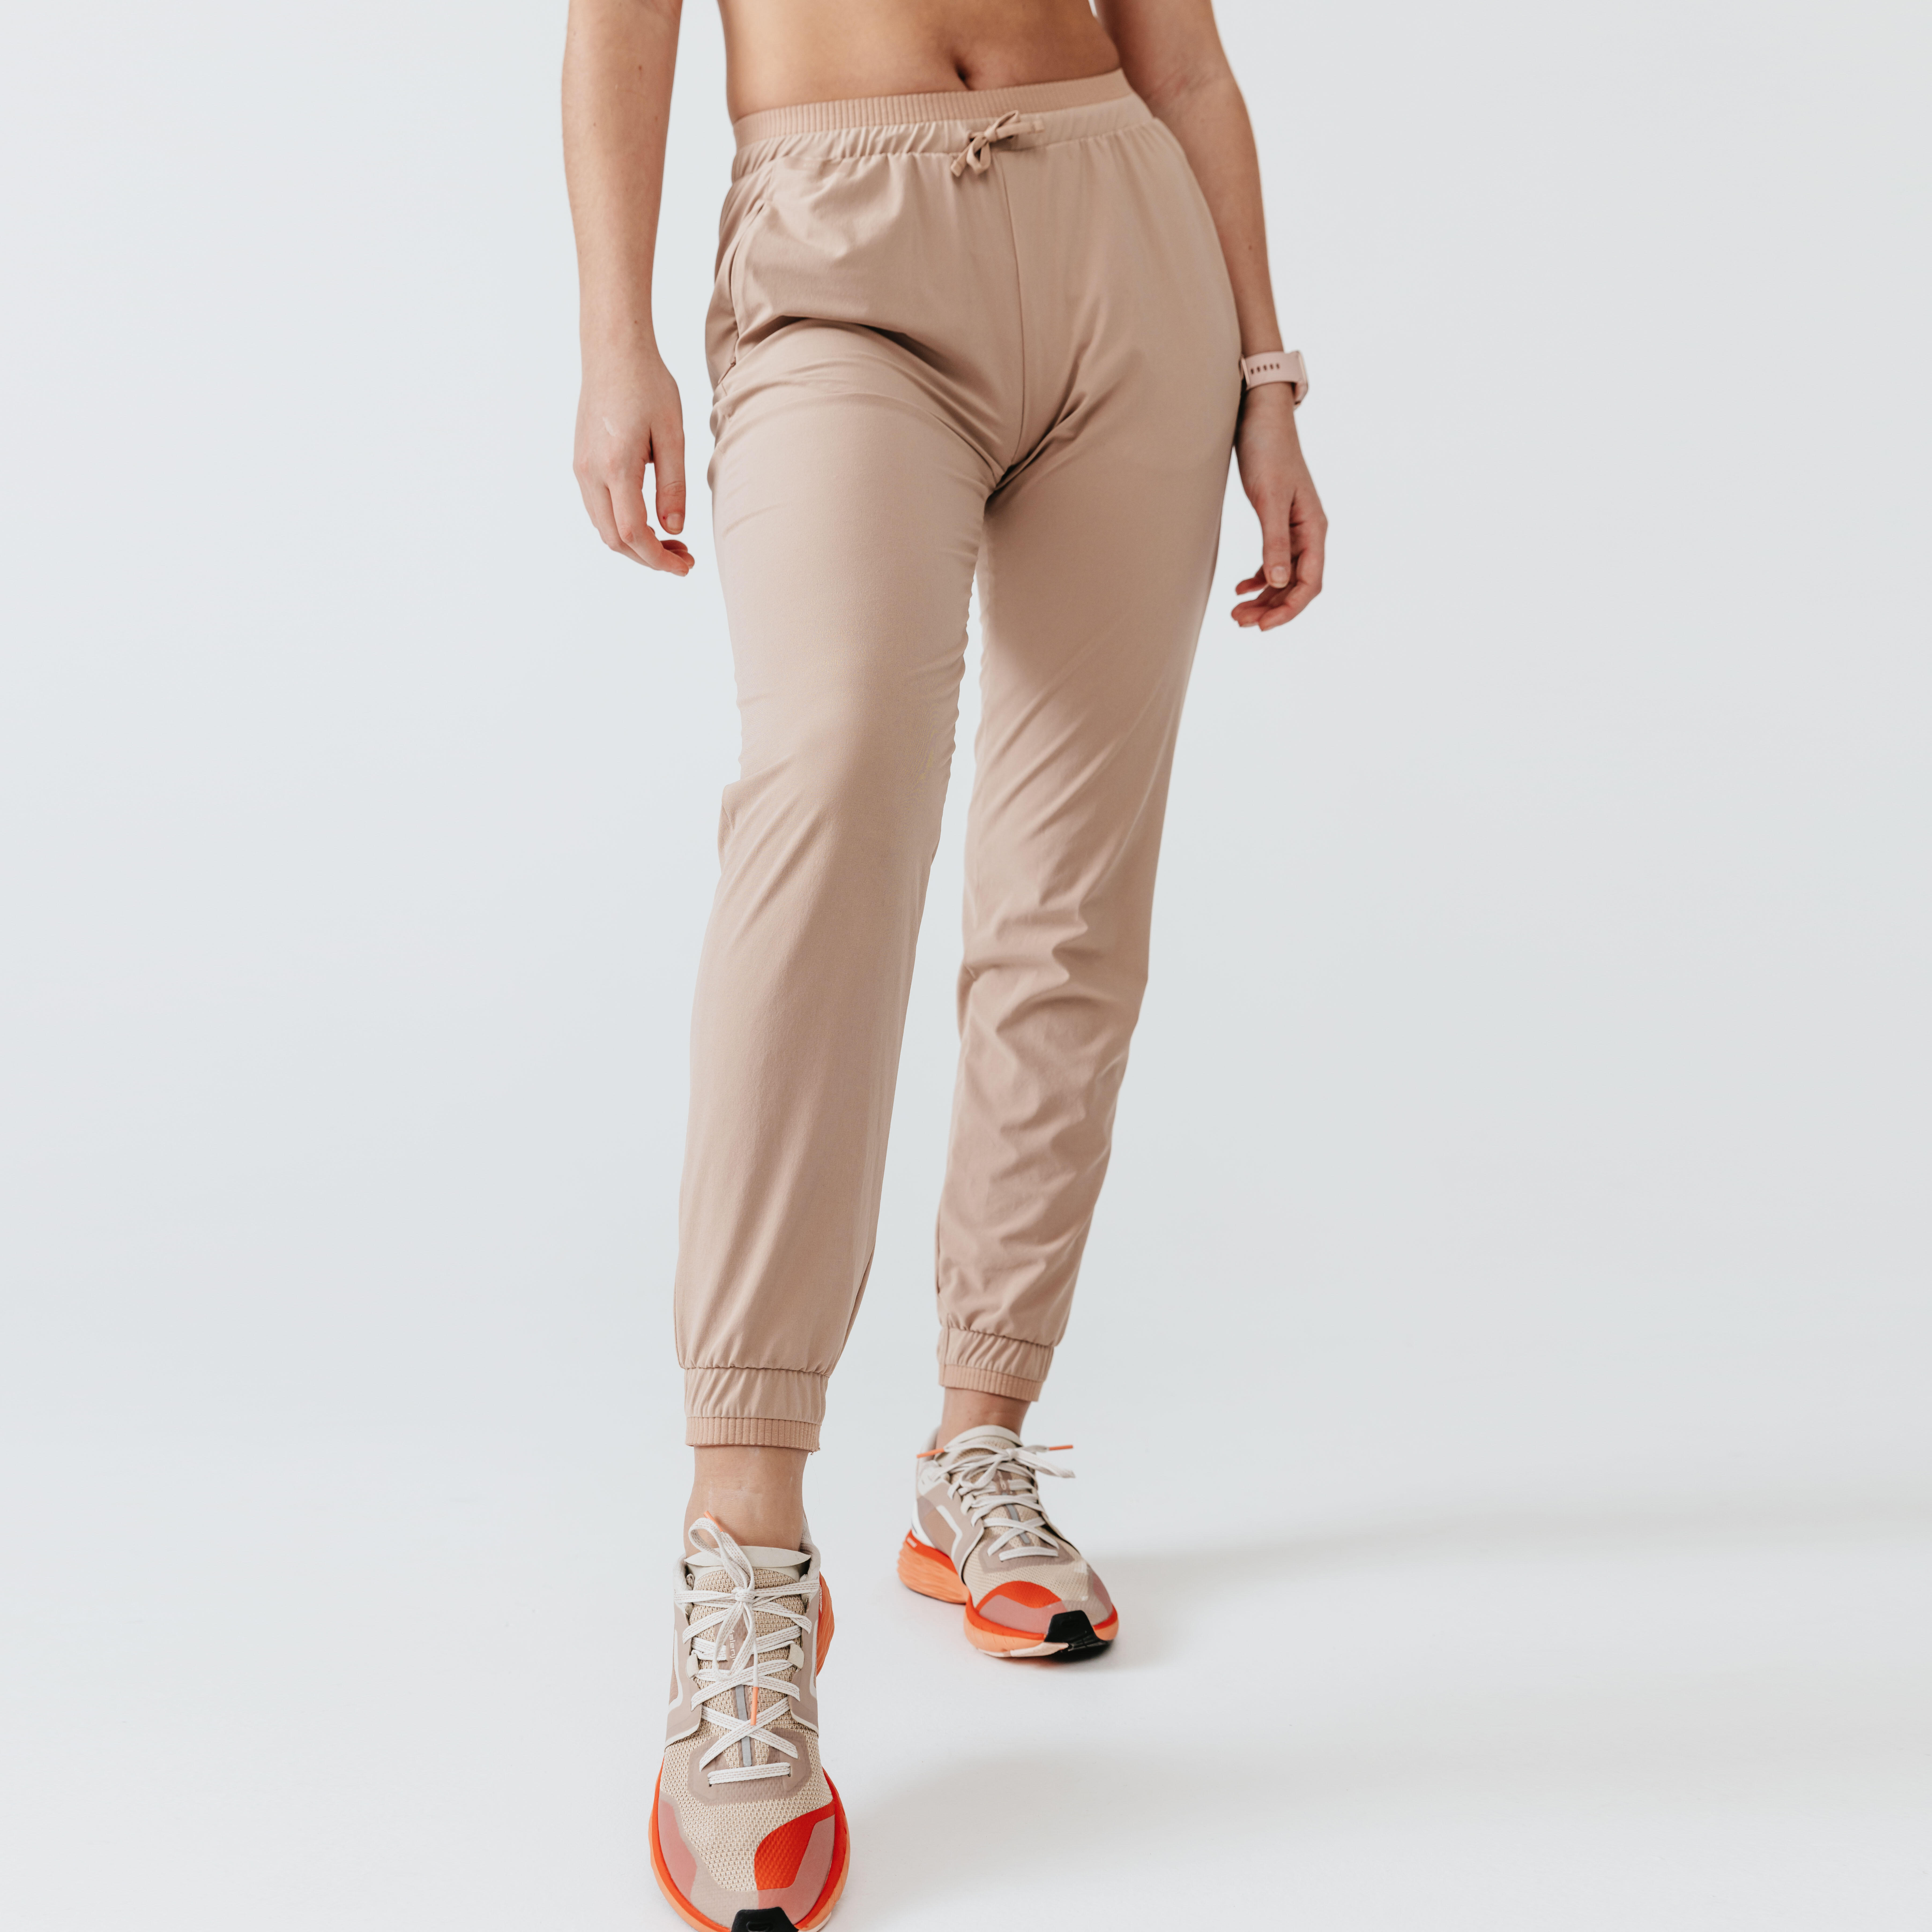 L JOGGER PANT MII Cotton sports trousers  Made in Italy  Women  Diadora  Online Store IN